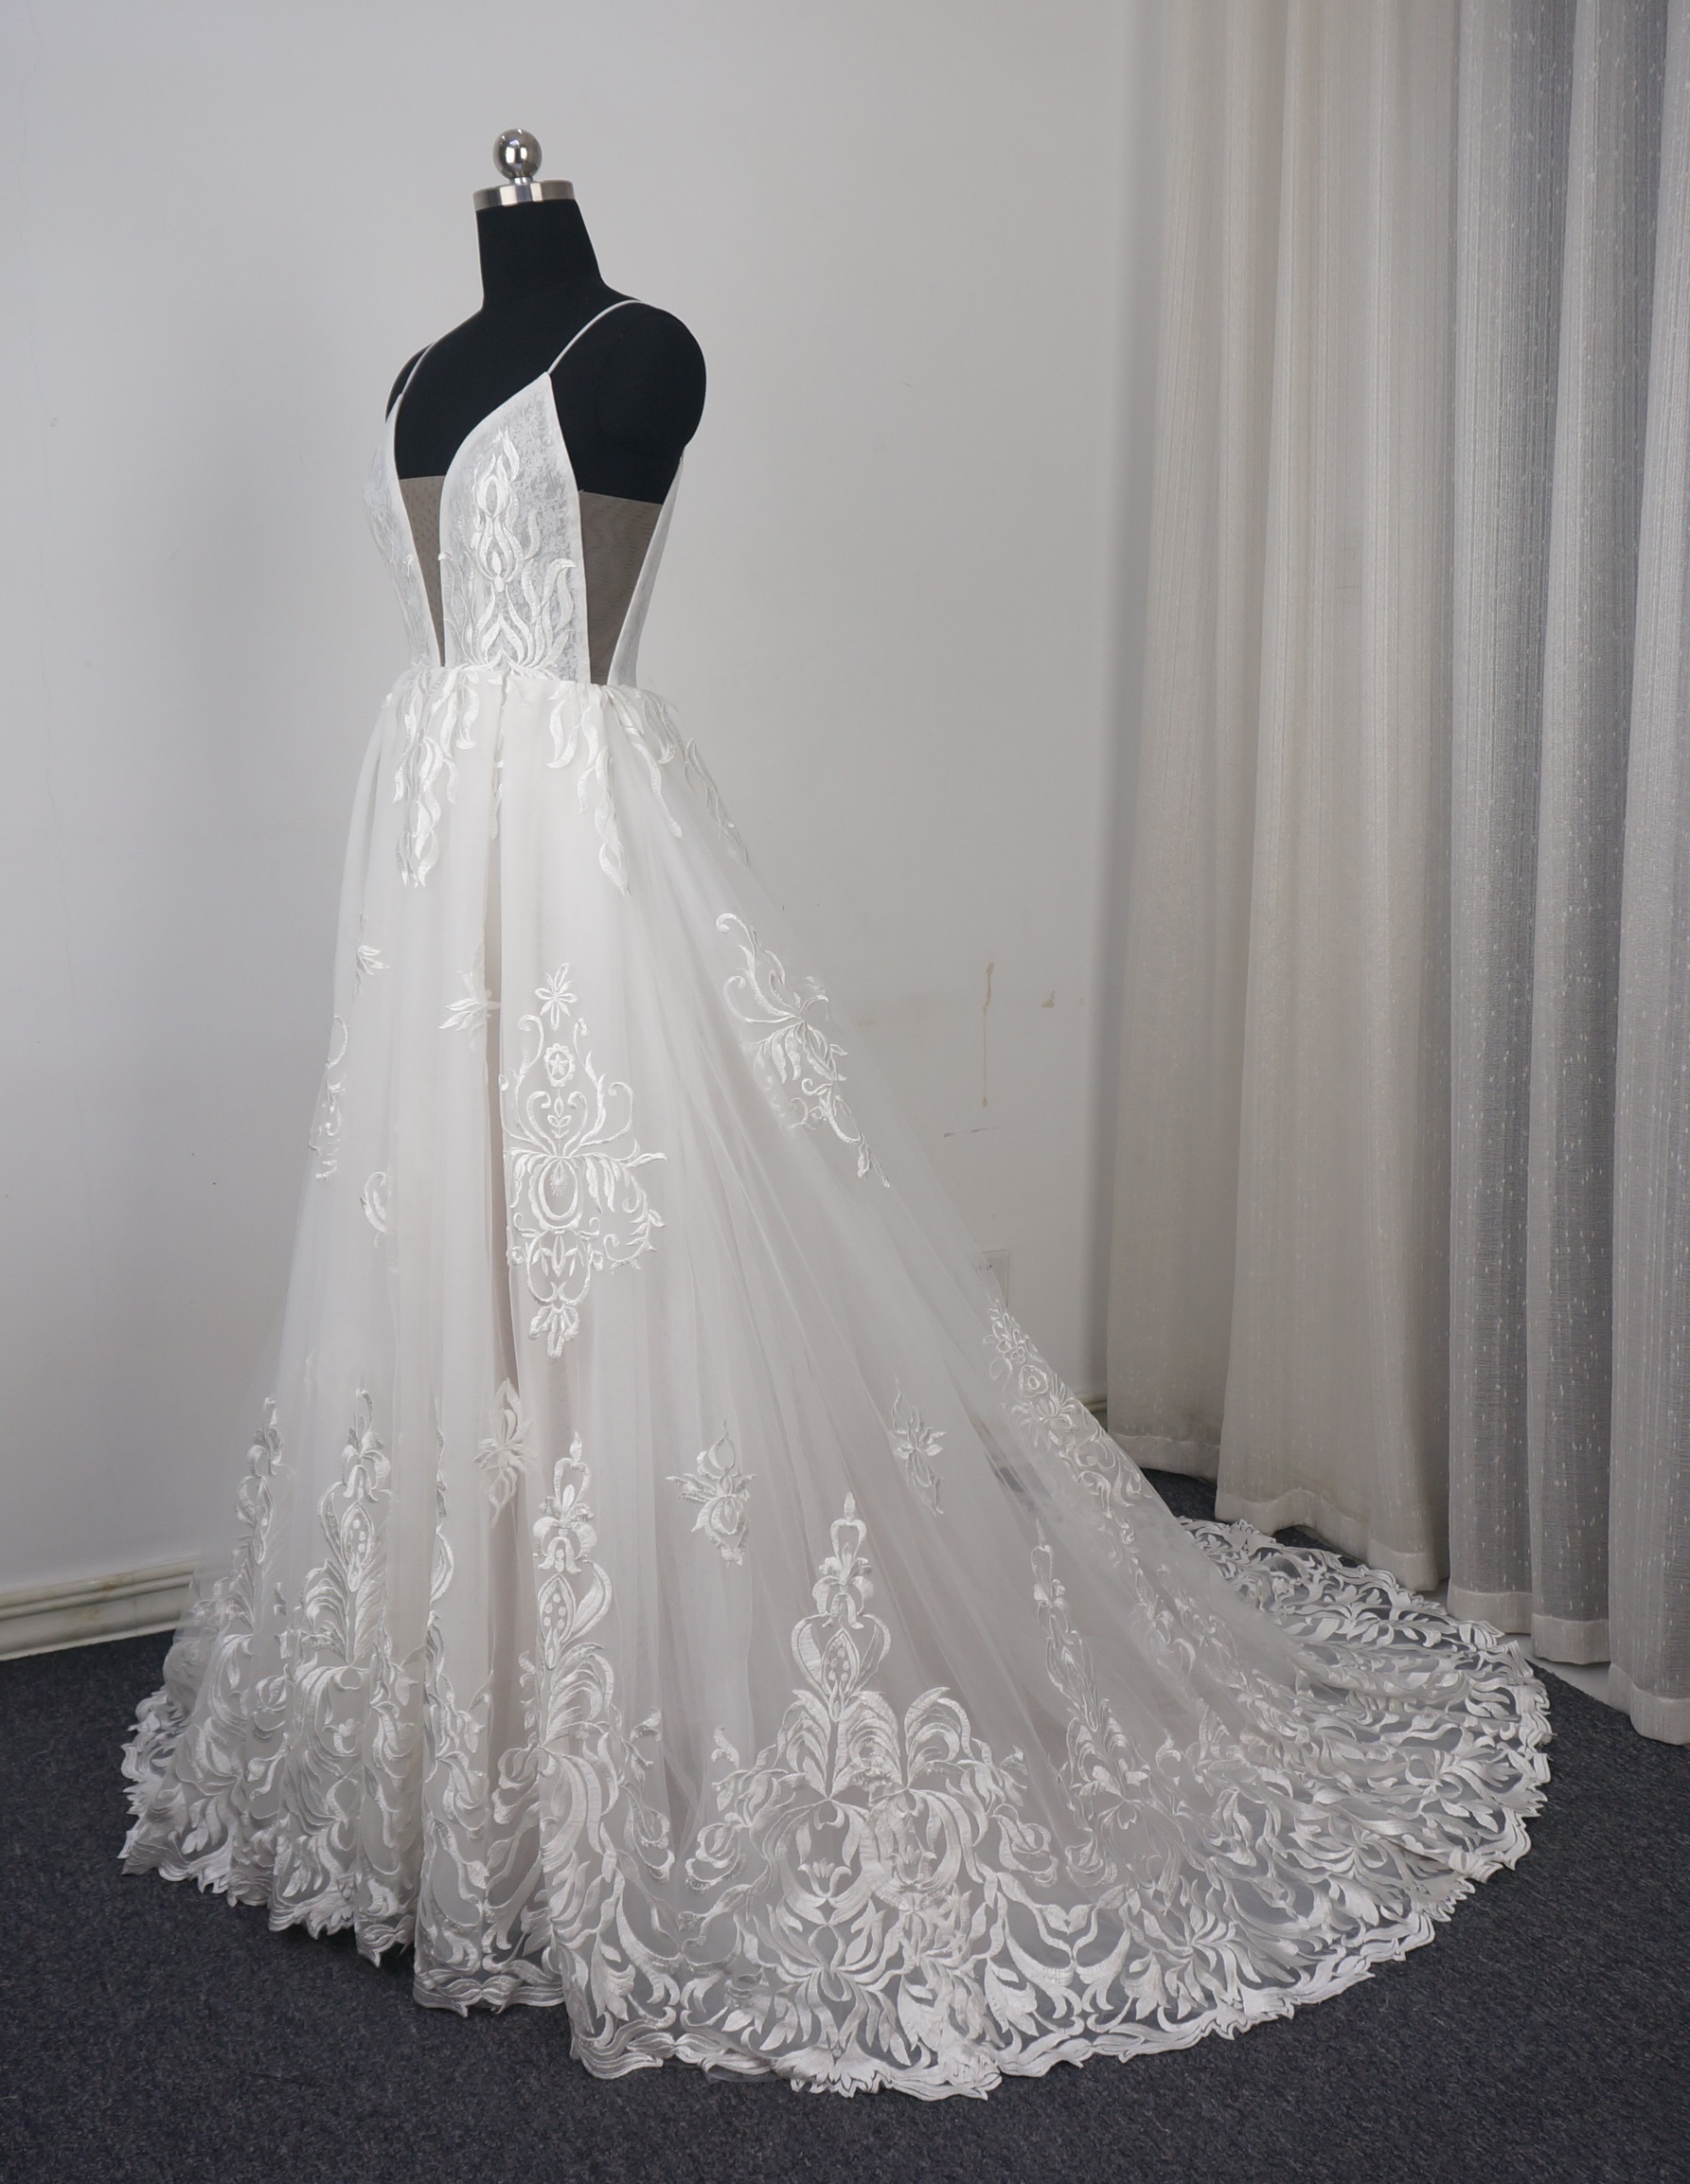 A Lace Wedding Dress Is Truly Memorable.